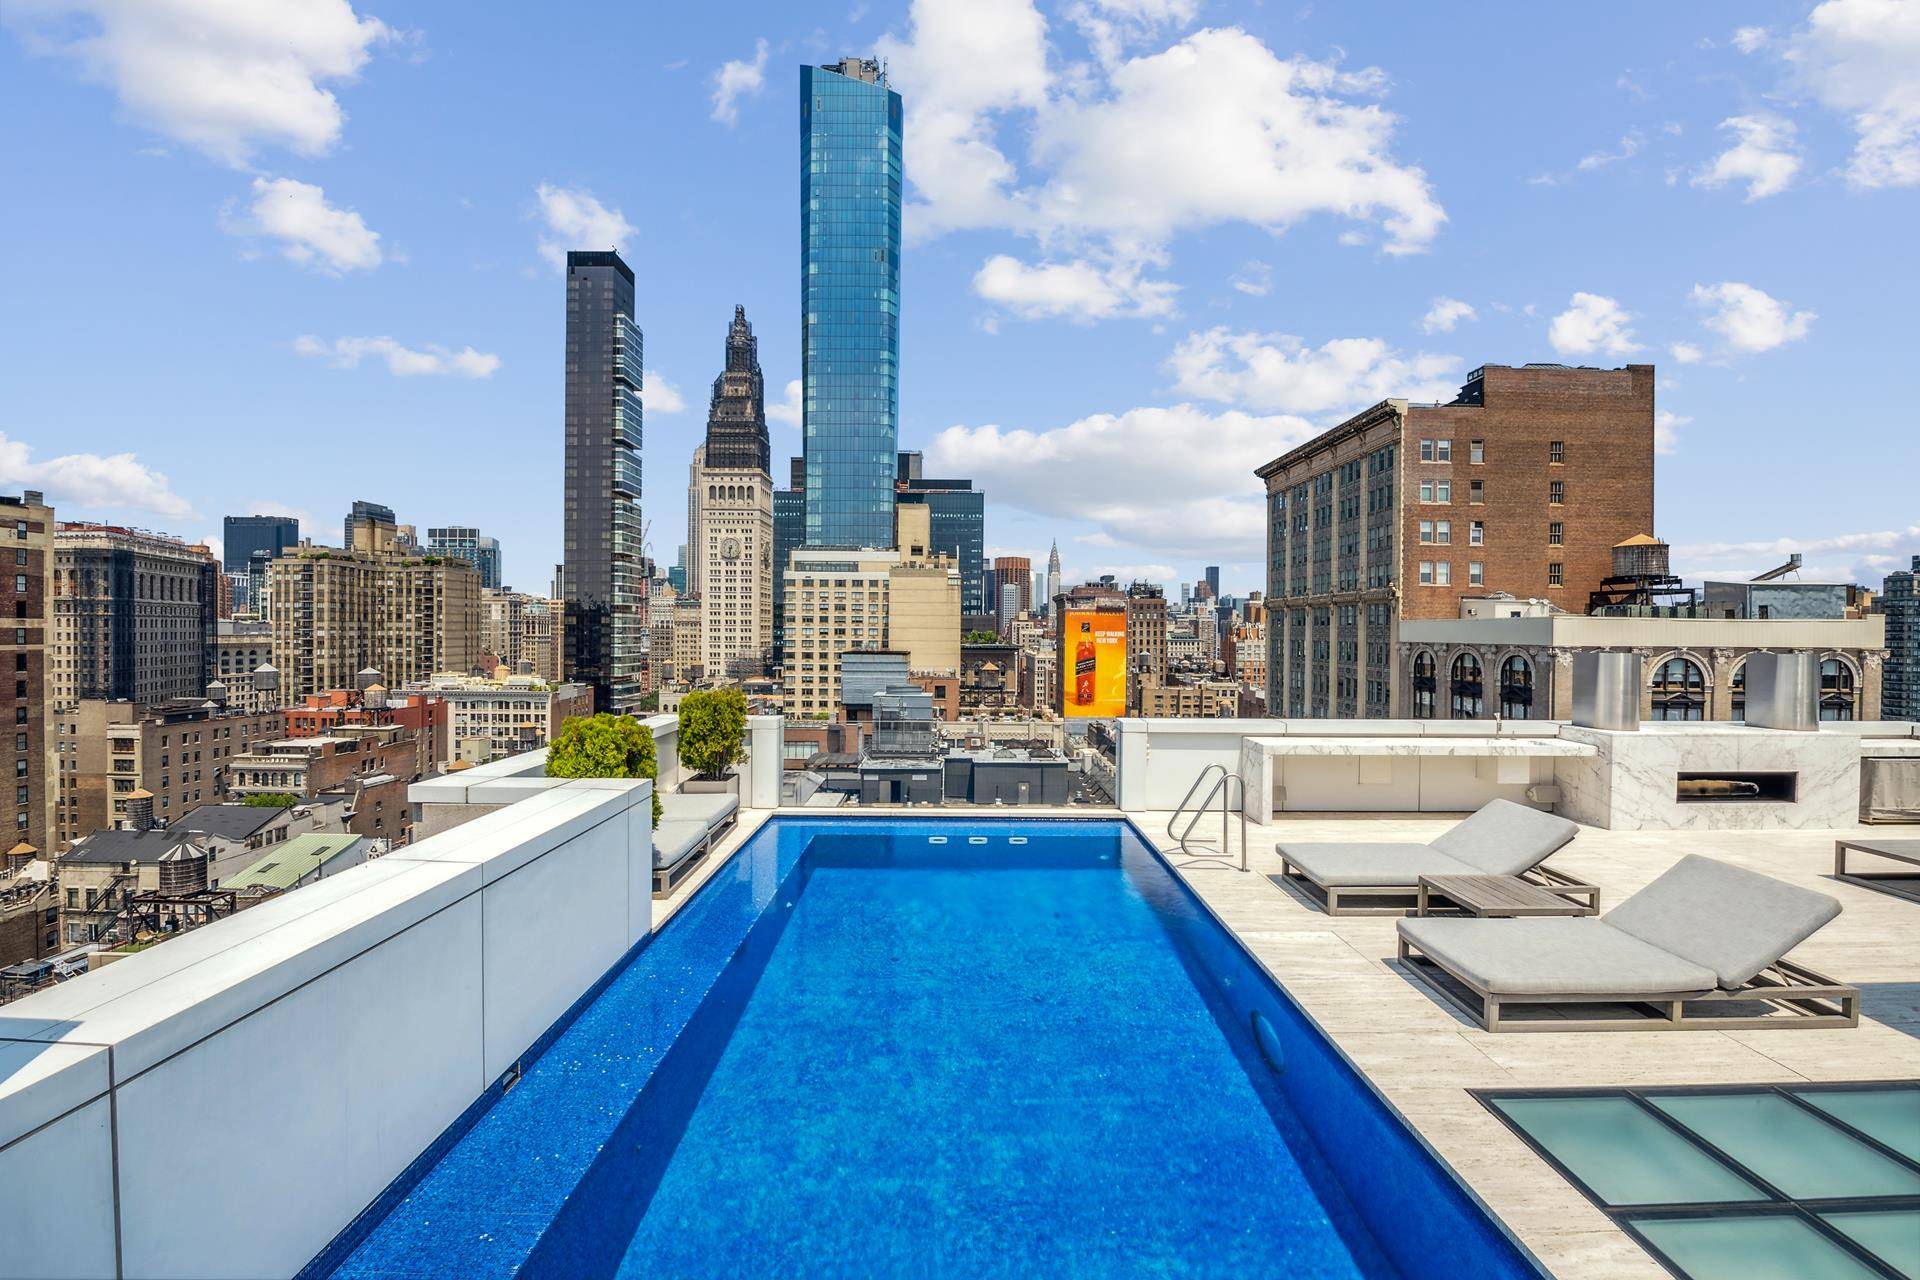 The triplex penthouse offers the most stunning private pool in all of Manhattan a thirty feet long masterpiece constructed of custom blue Mosaic Bisazza and infinity glass wall.